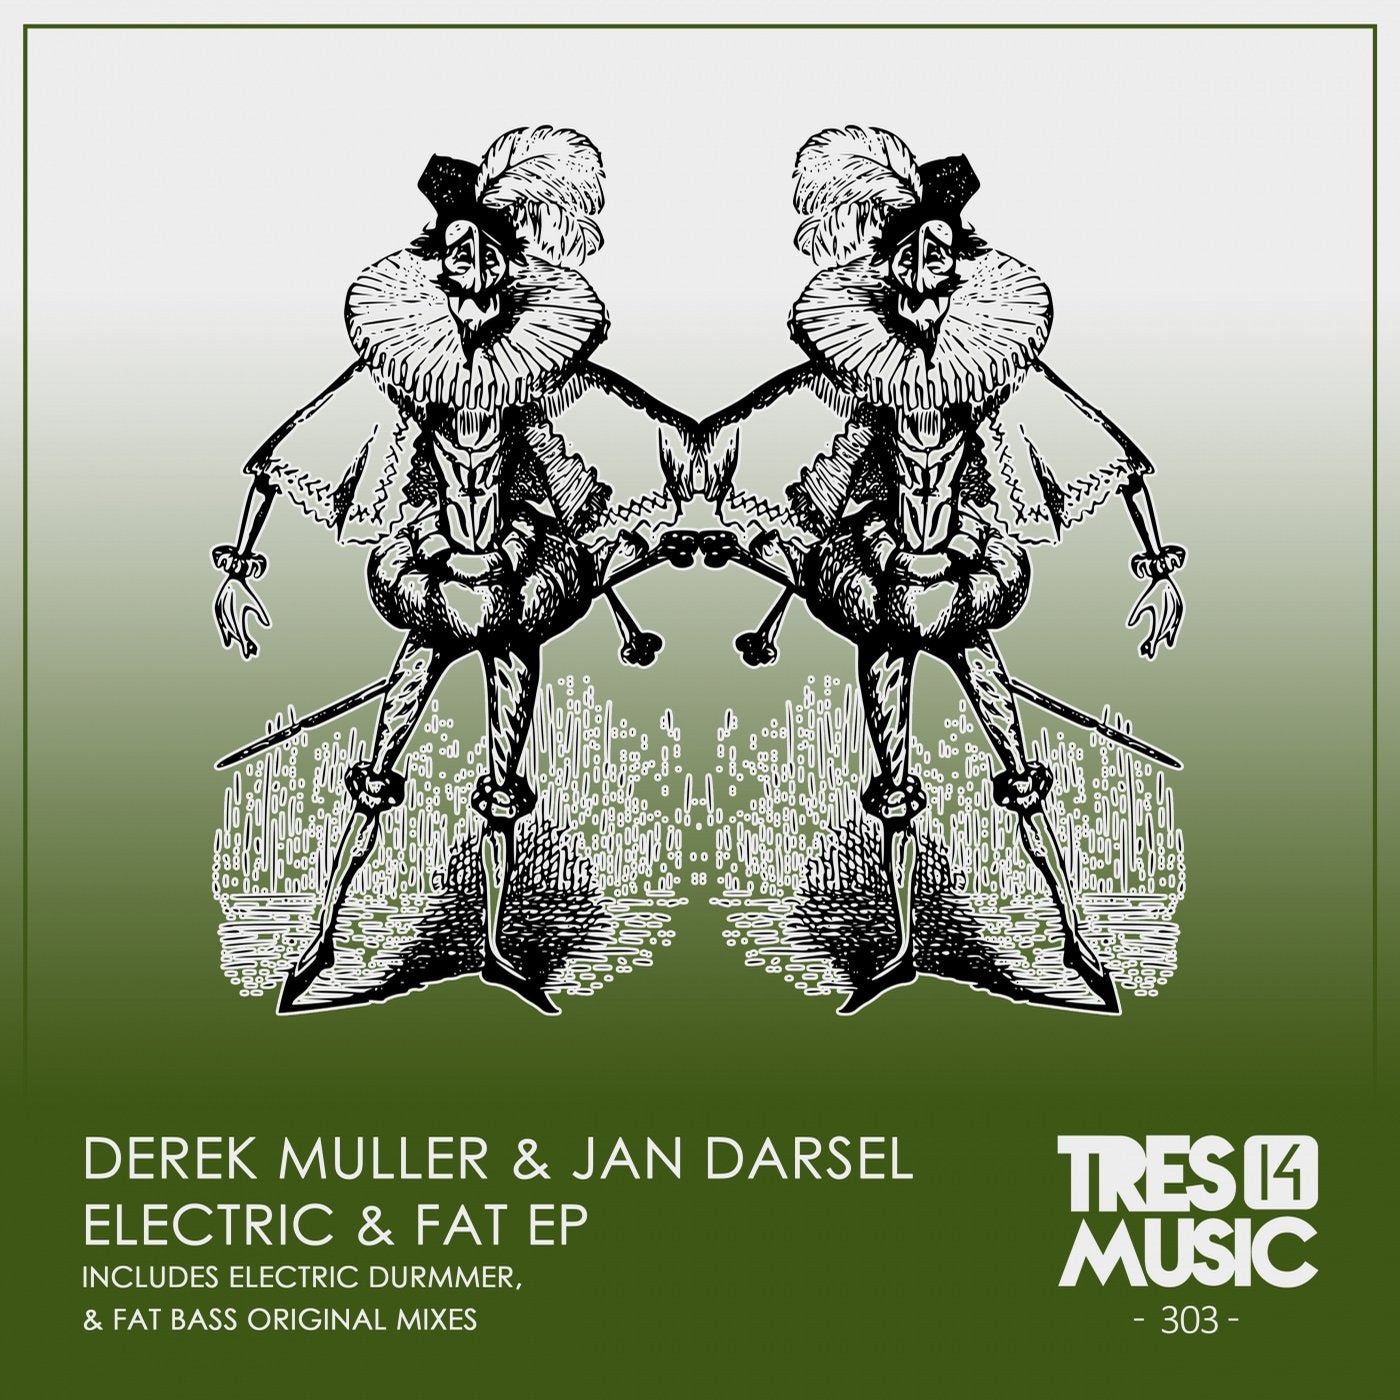 ELECTRIC & FAT EP